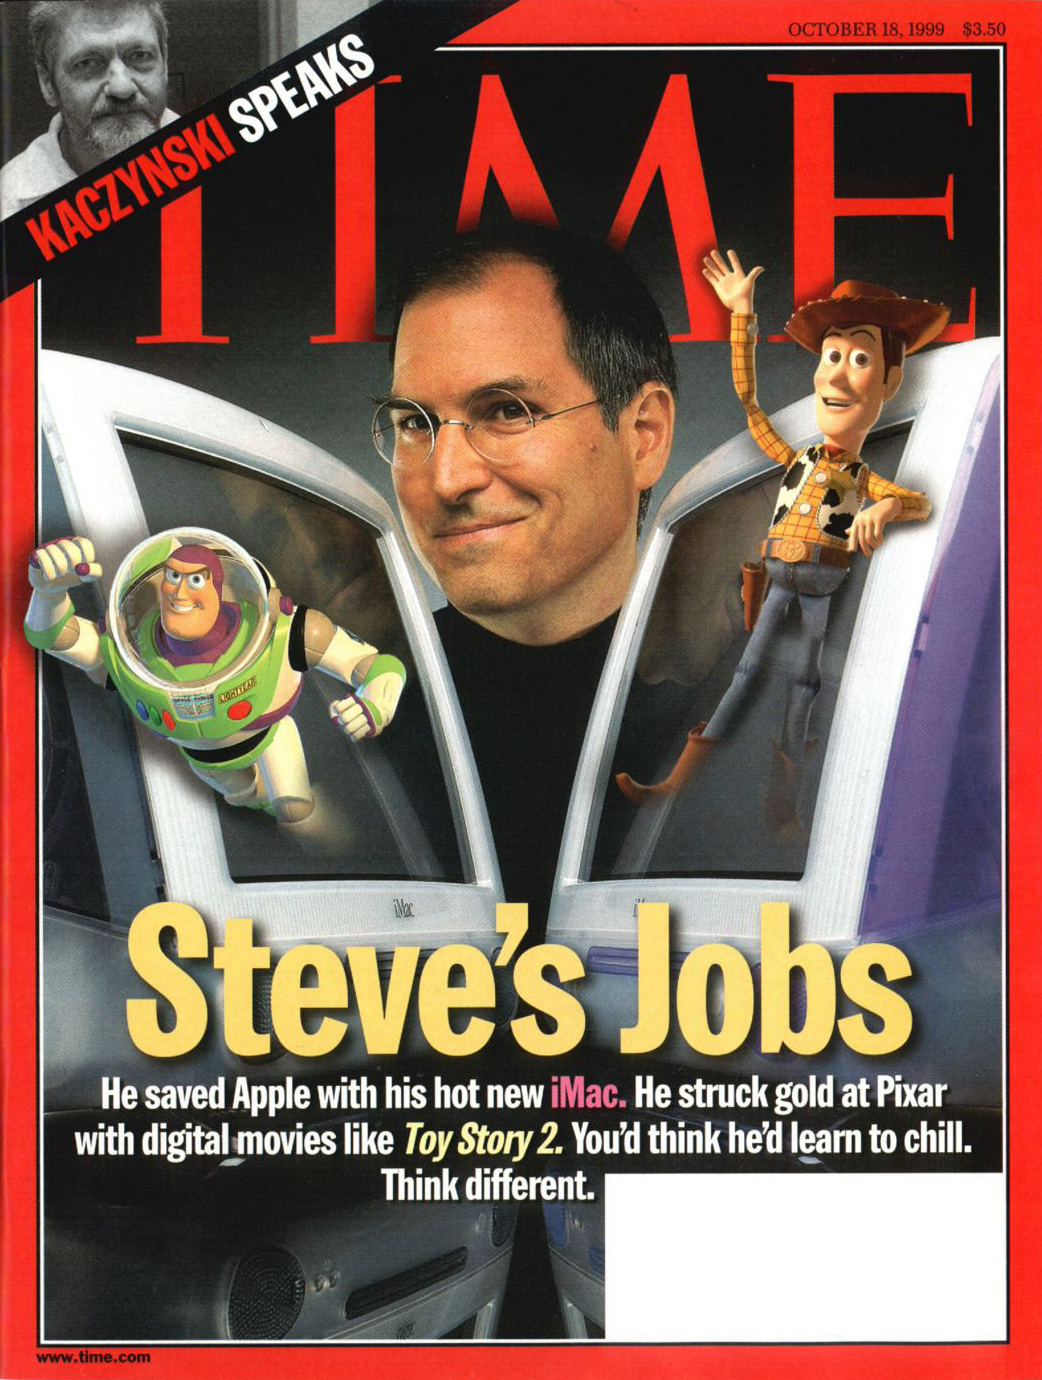 The Oct. 18, 1999 cover of TIME